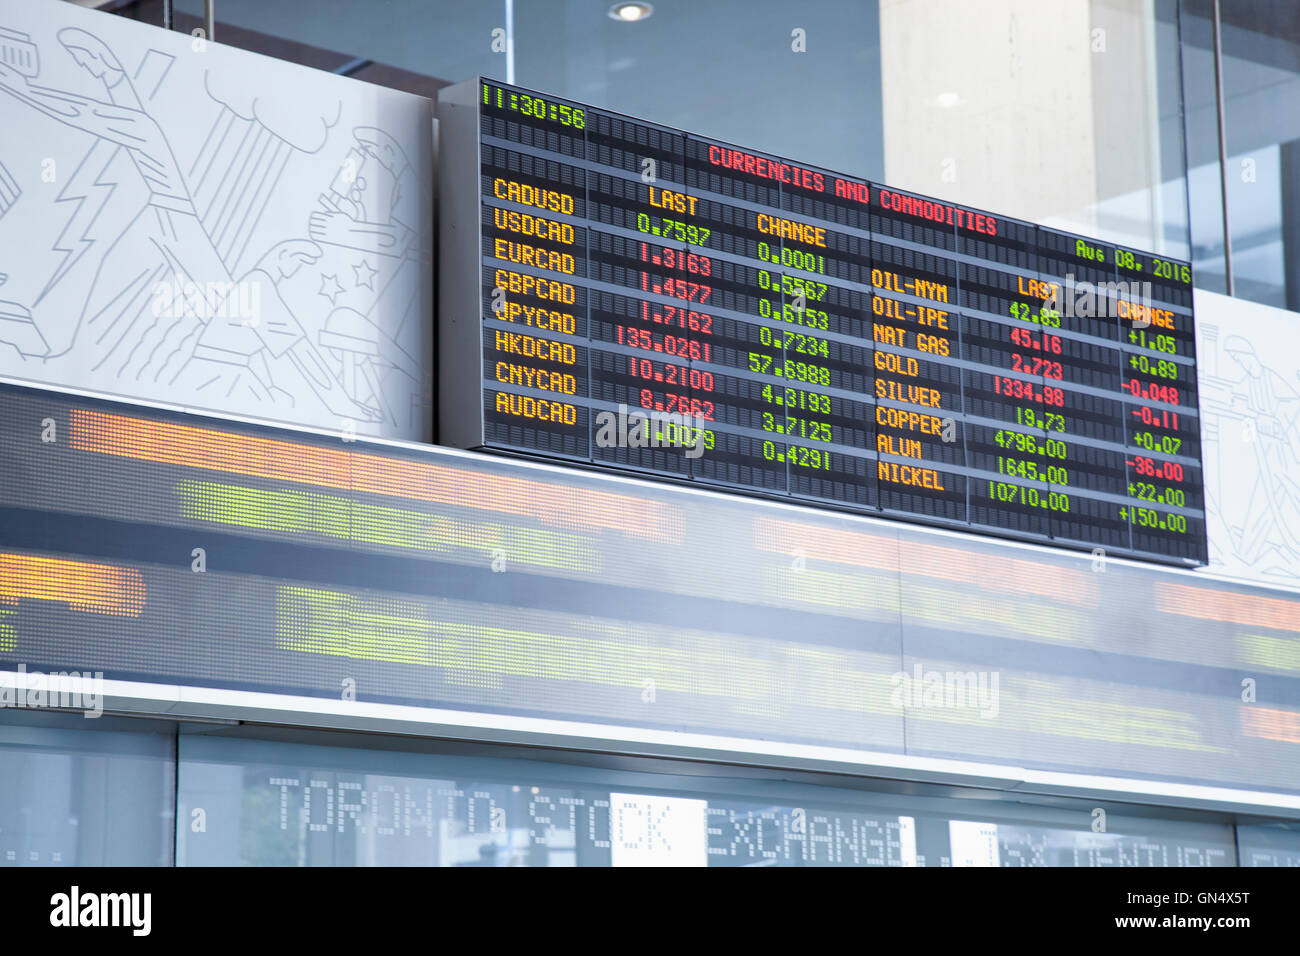 TORONTO - AUGUST 8, 2016: The currency exchange rates displayed at the Toronto Stock Exchange with stock ticker in blurred motio Stock Photo